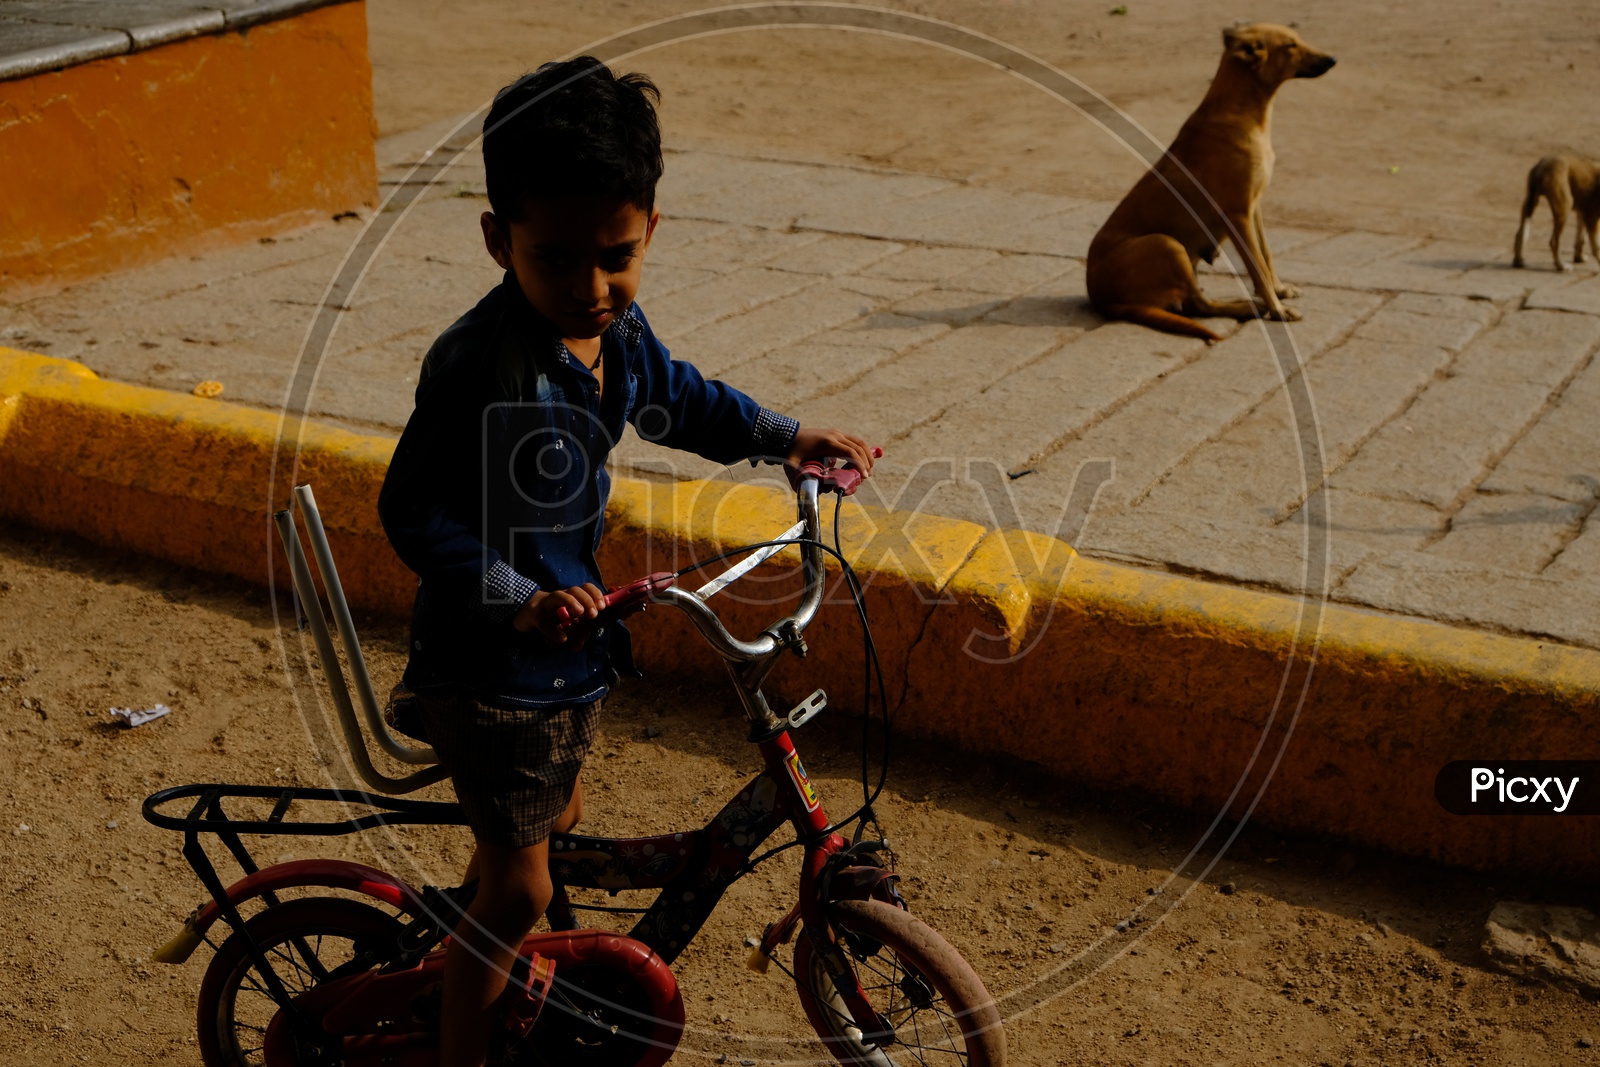 A Boy On a Bicycle